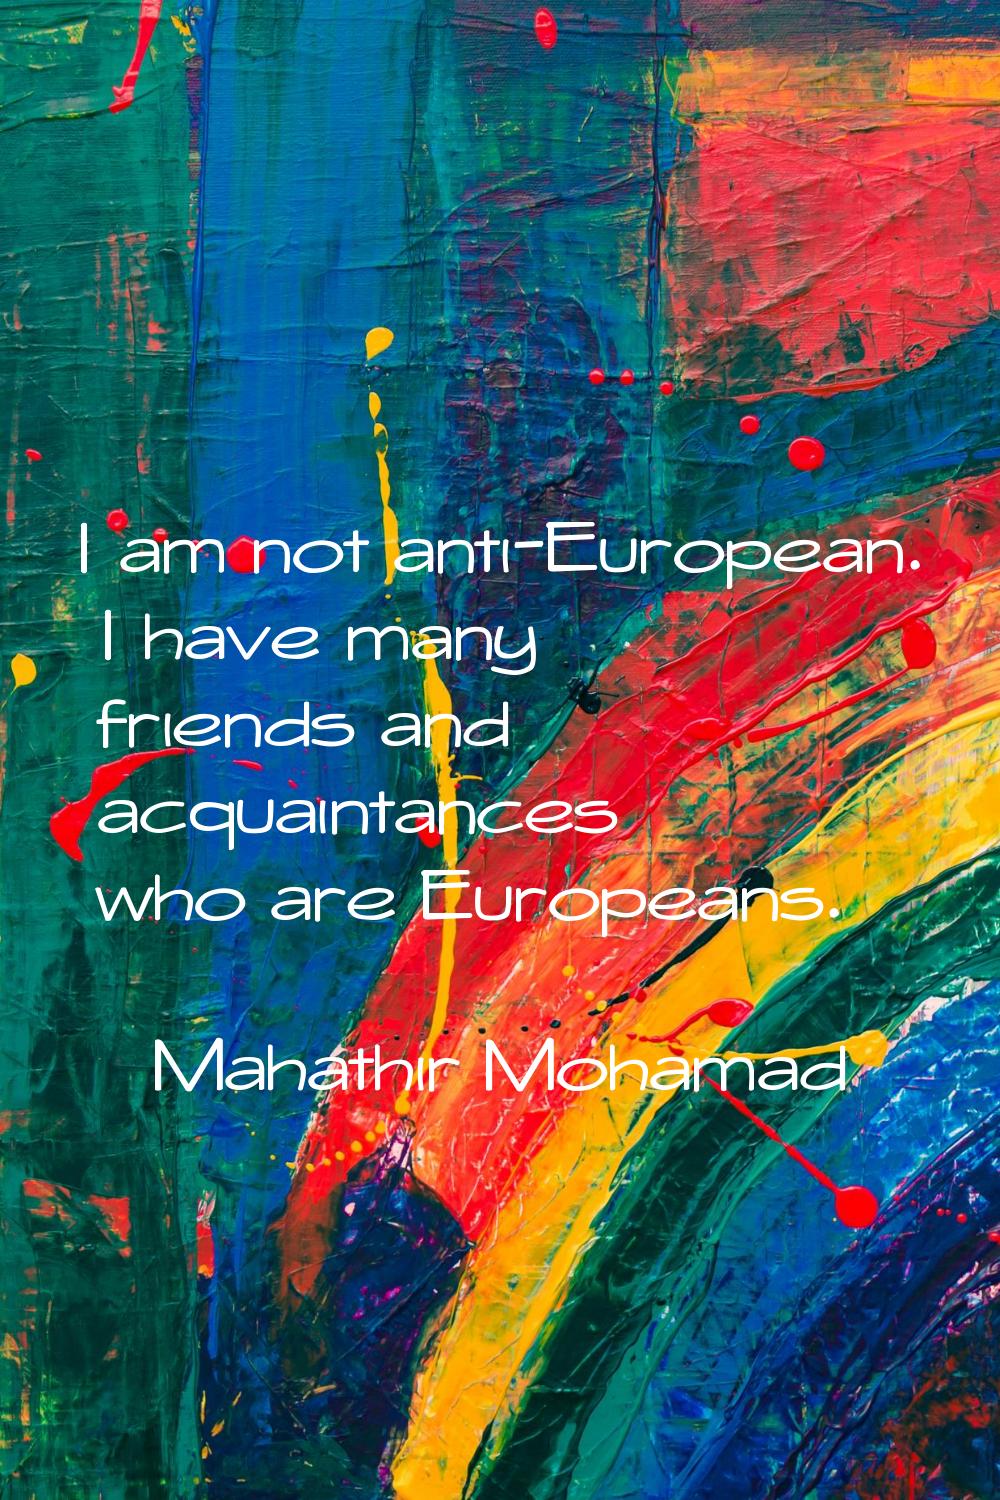 I am not anti-European. I have many friends and acquaintances who are Europeans.